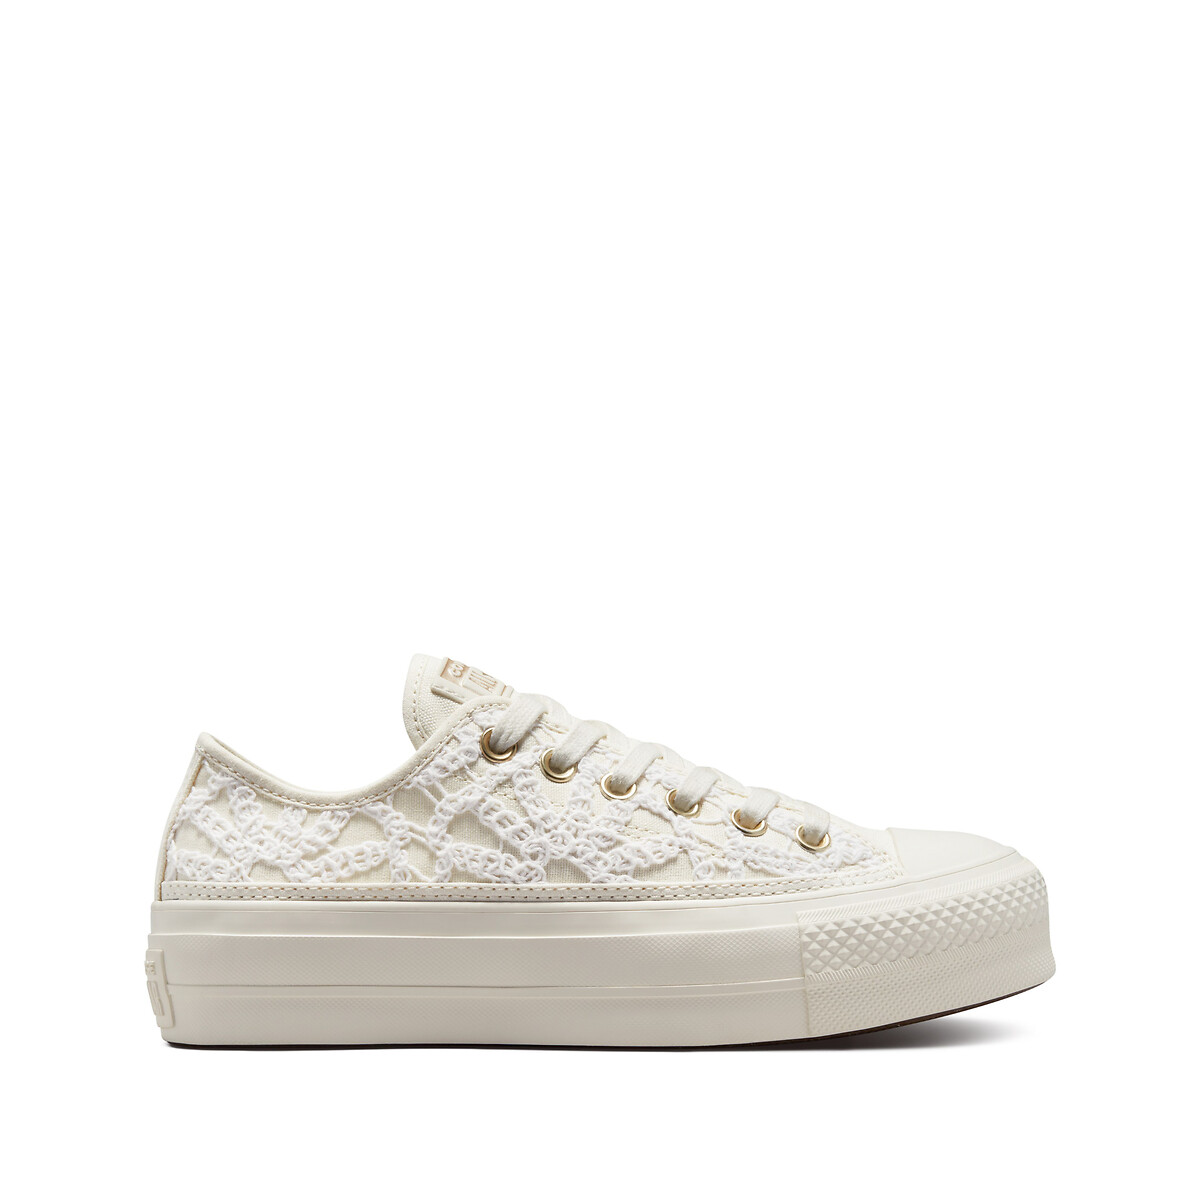 All Star Lift Festival Daisy Cord Canvas Trainers